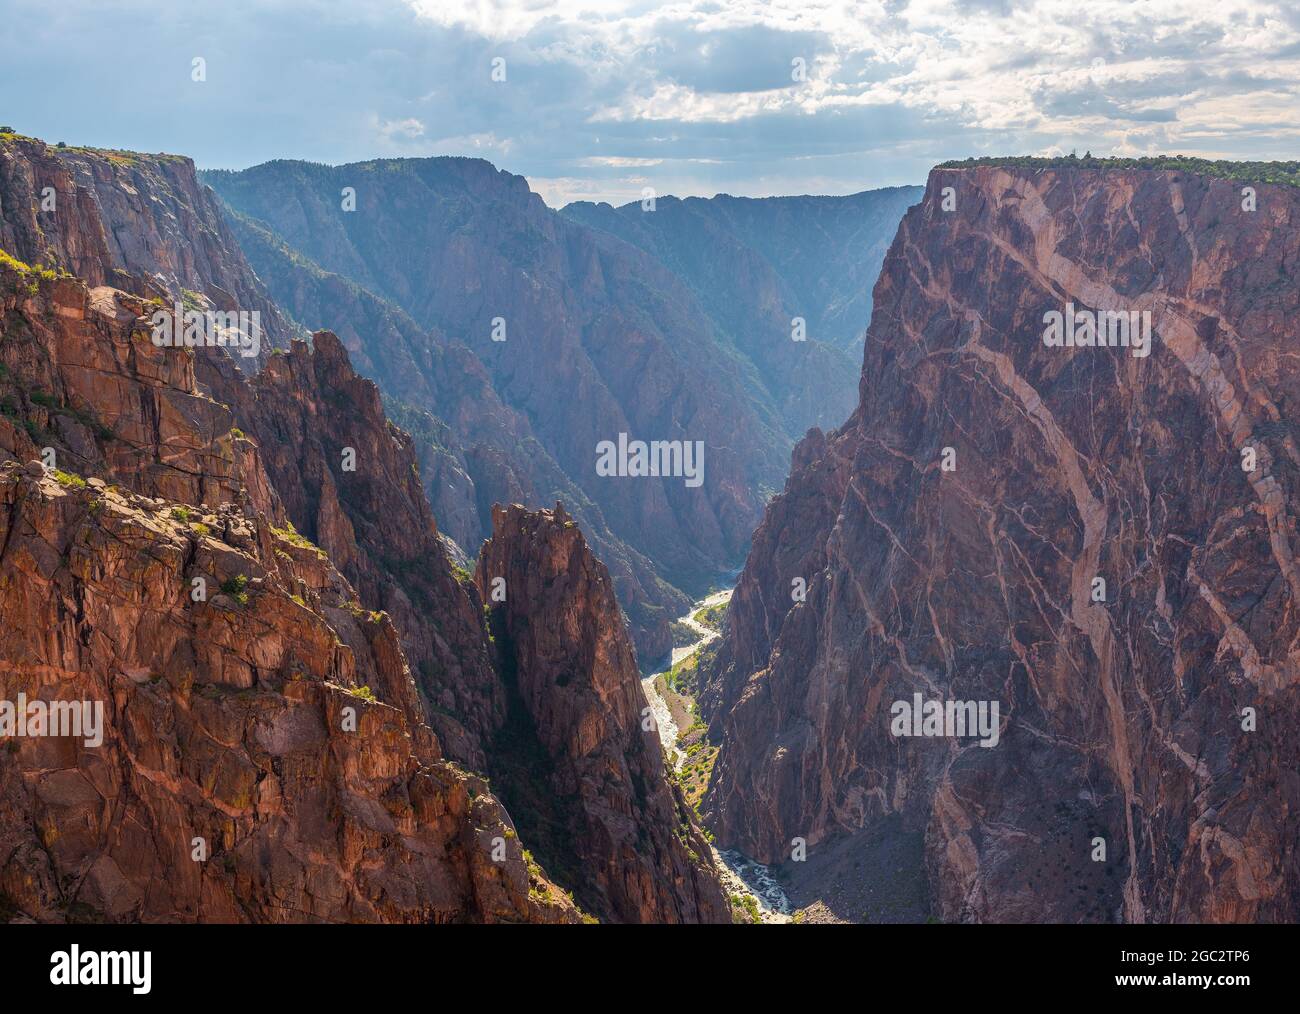 Black Canyon of the Gunnison with two dragons and the Gunnison River cutting through the rock in valley, Colorado, USA. Stock Photo